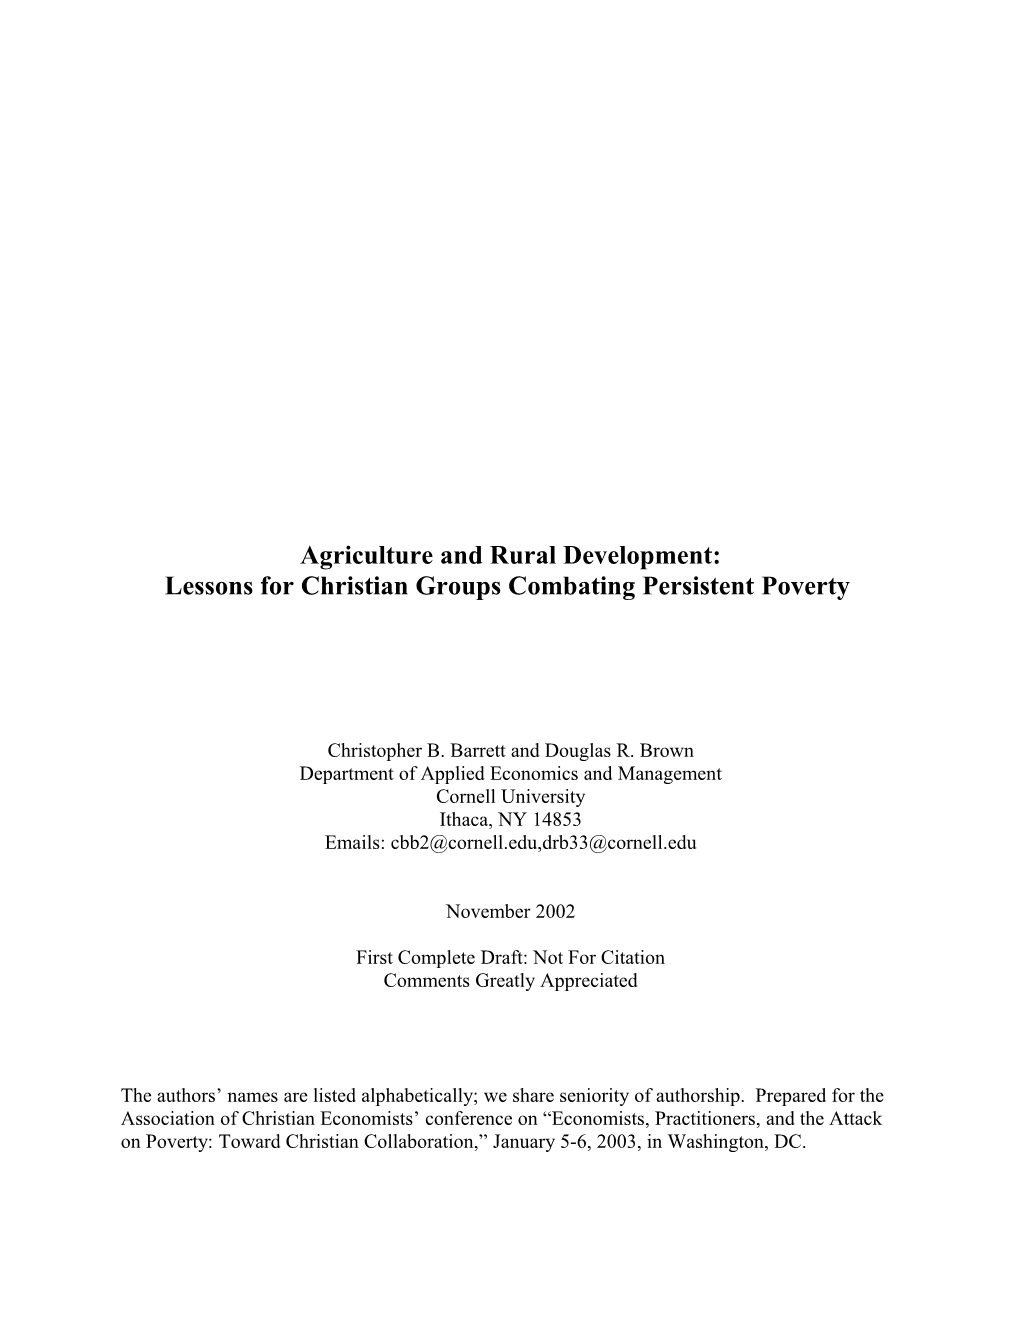 Agriculture And Rural Development